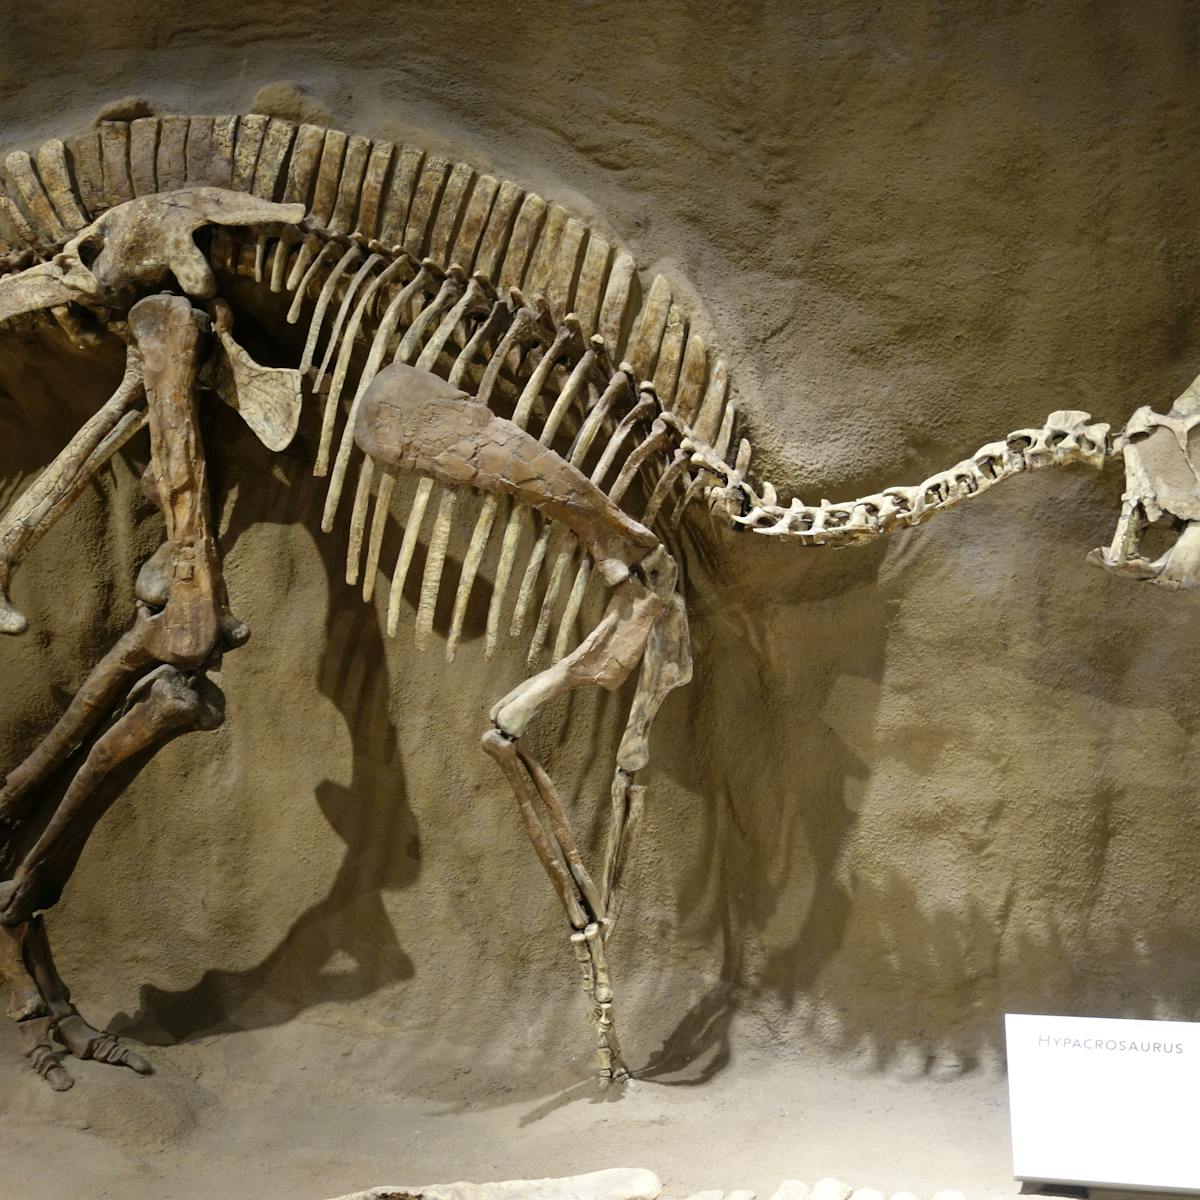 Has dinosaur DNA been found? An expert explains what we really know